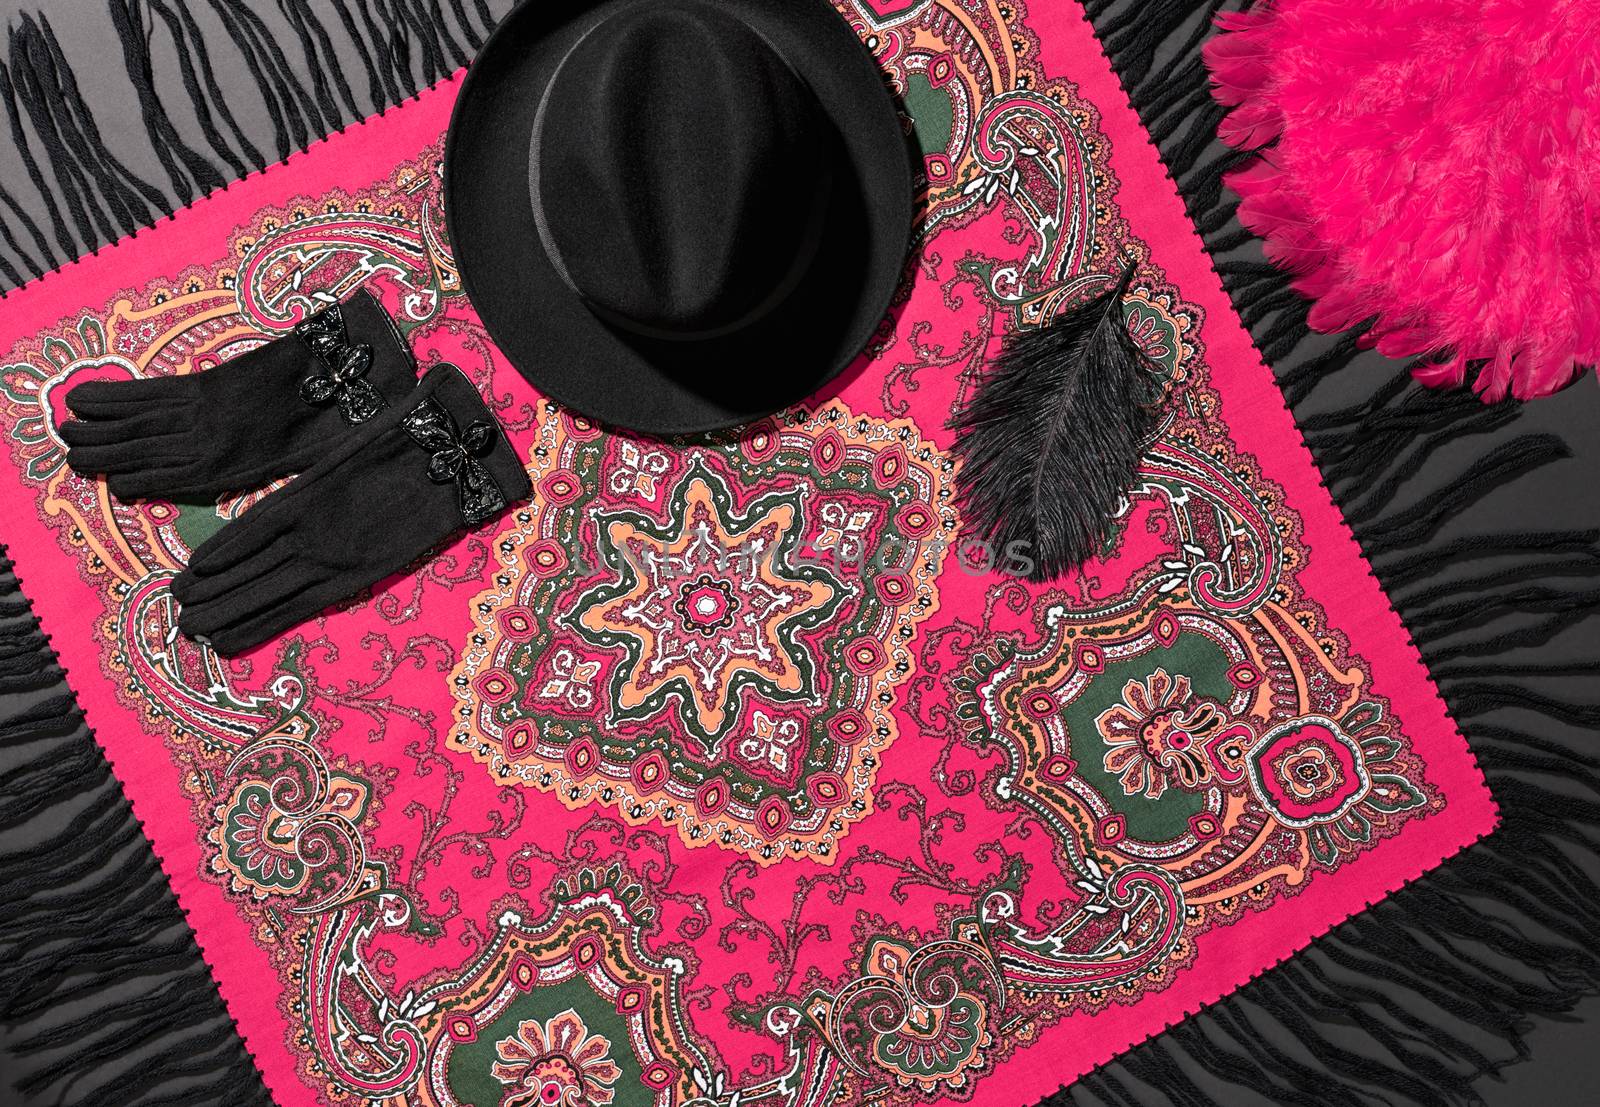 Fashion clothes stylish set, colored shawl, accessories. Ethnic traditional pattern pink cashmere wool headscarf, trendy black hat, gloves, feather.Unusual creative elegant.Autumn winter.Vintage retro